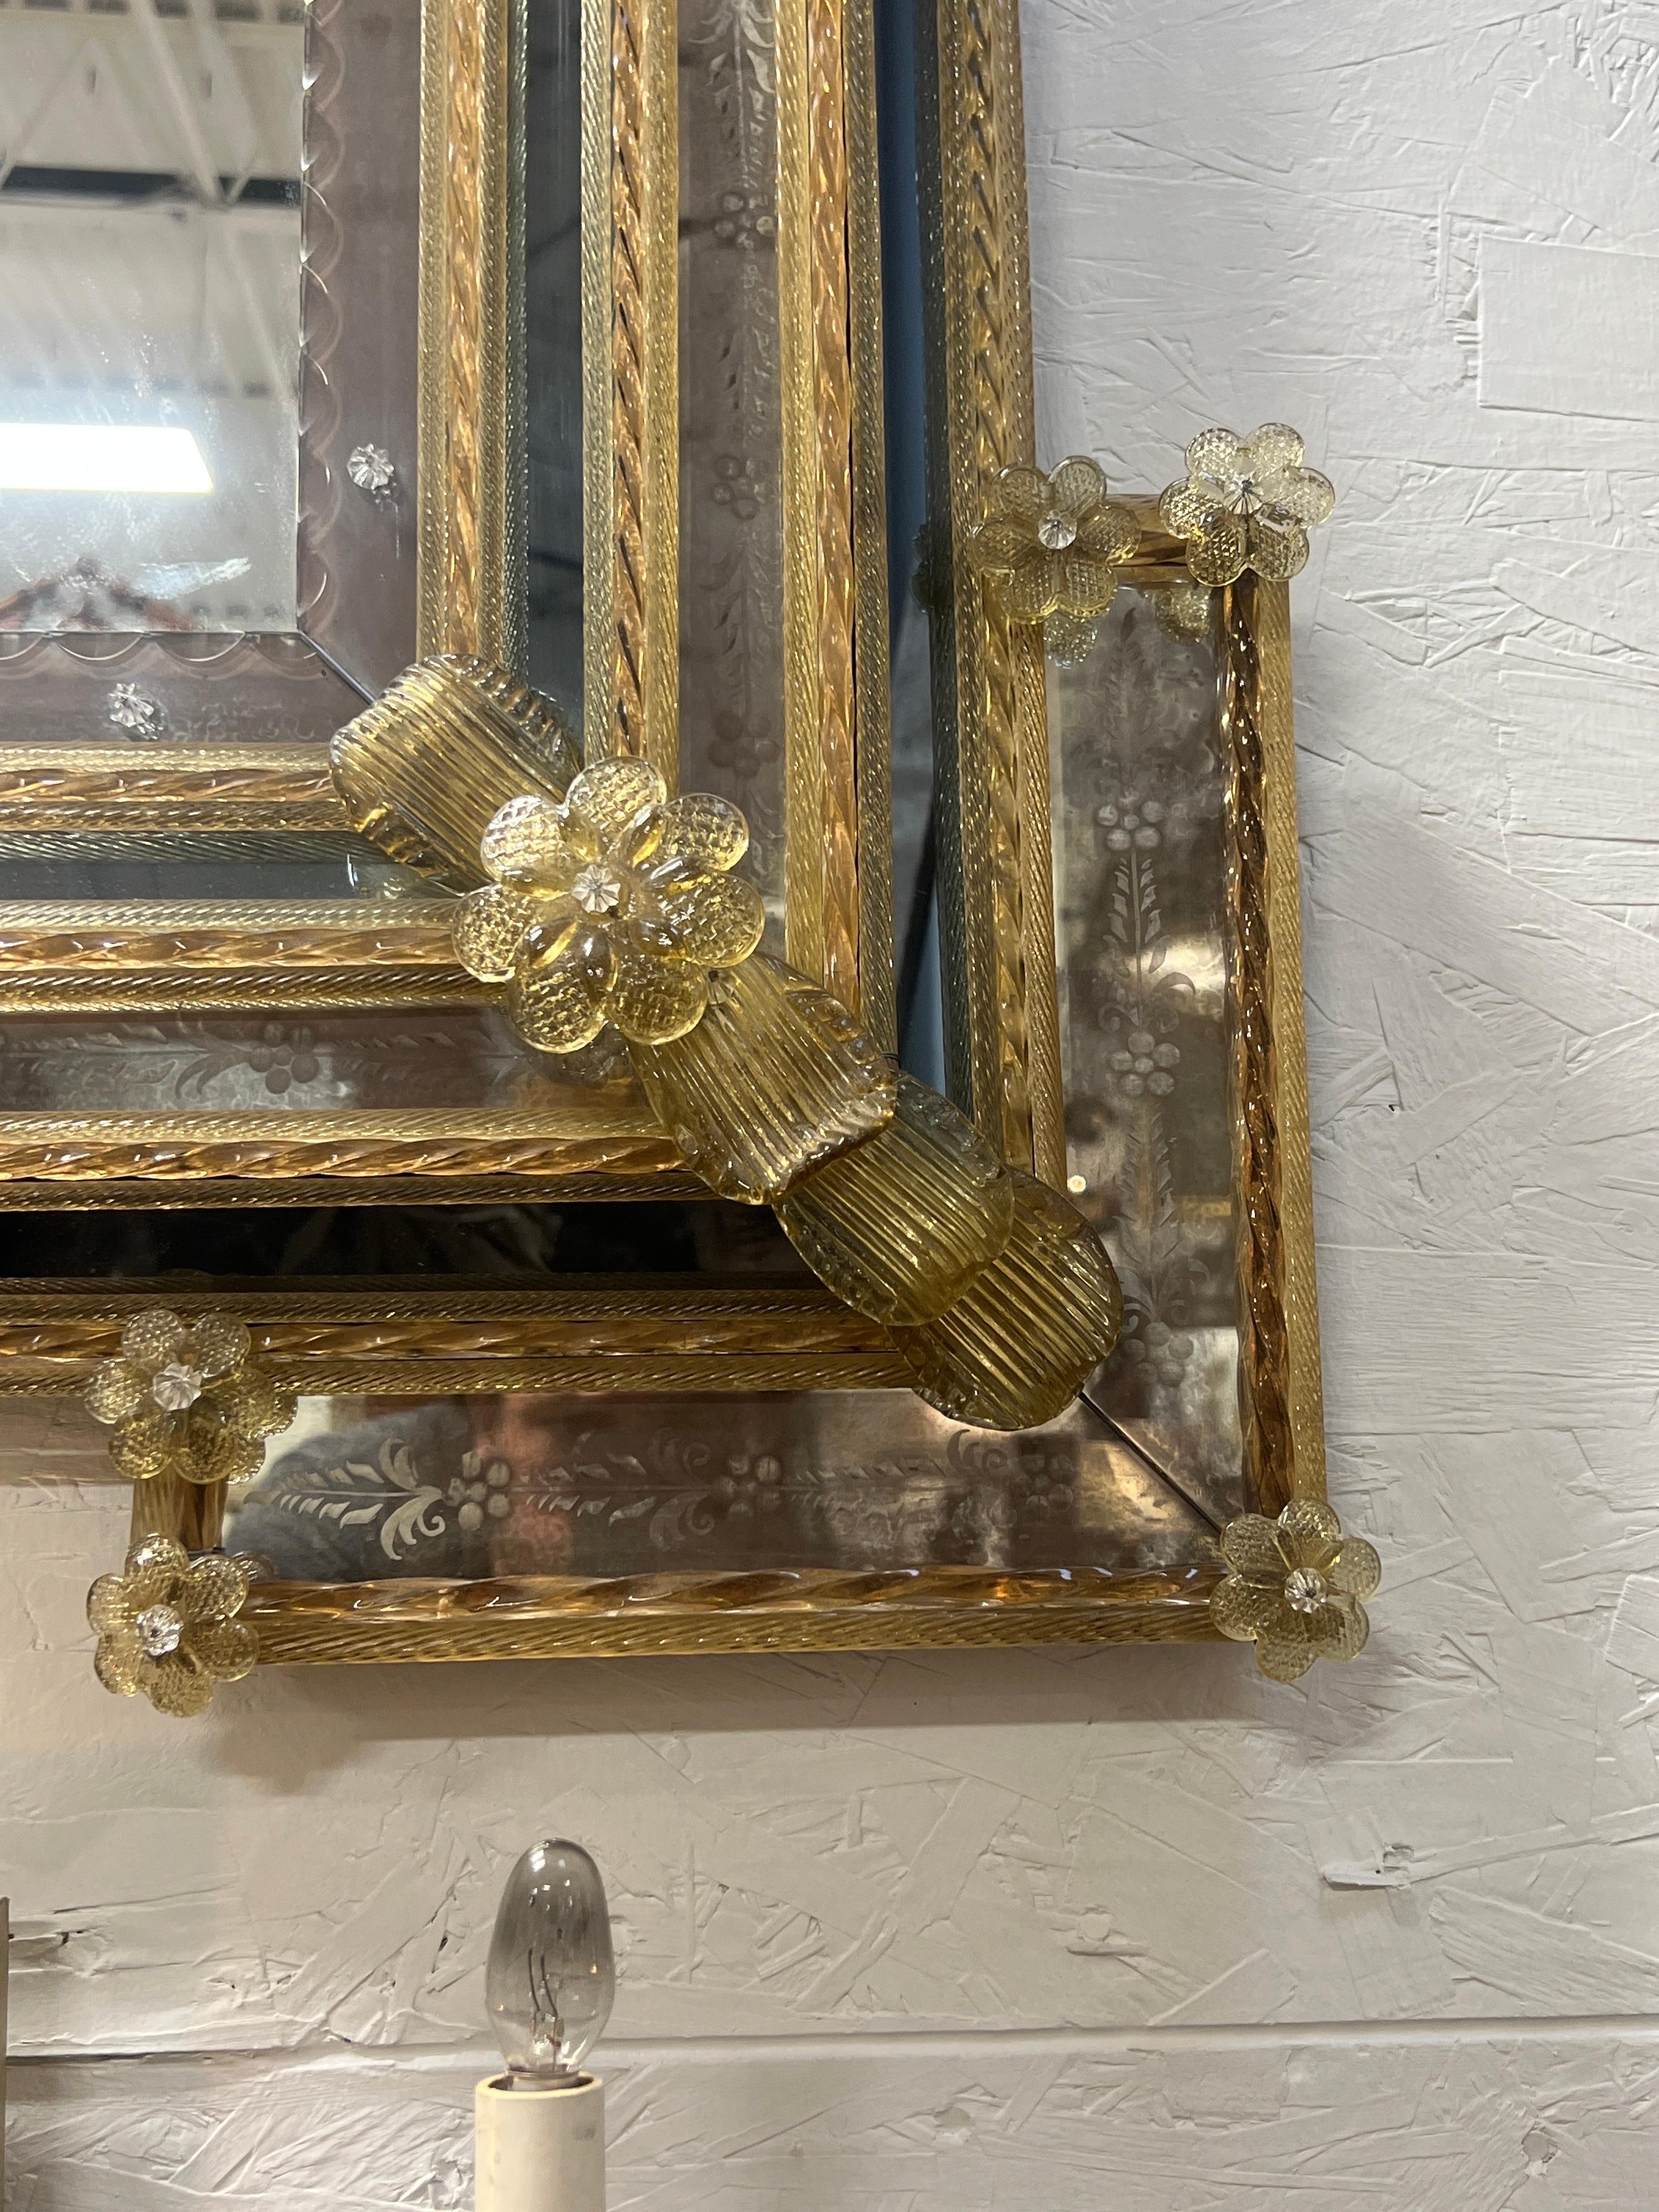 Venetian, Circa 1950.

An exceptionally large and fine quality mid century Venetian mirror of rectangular form, beveled glass edging, floral mounts, scrolled arms to top and etched glass across surfaces.